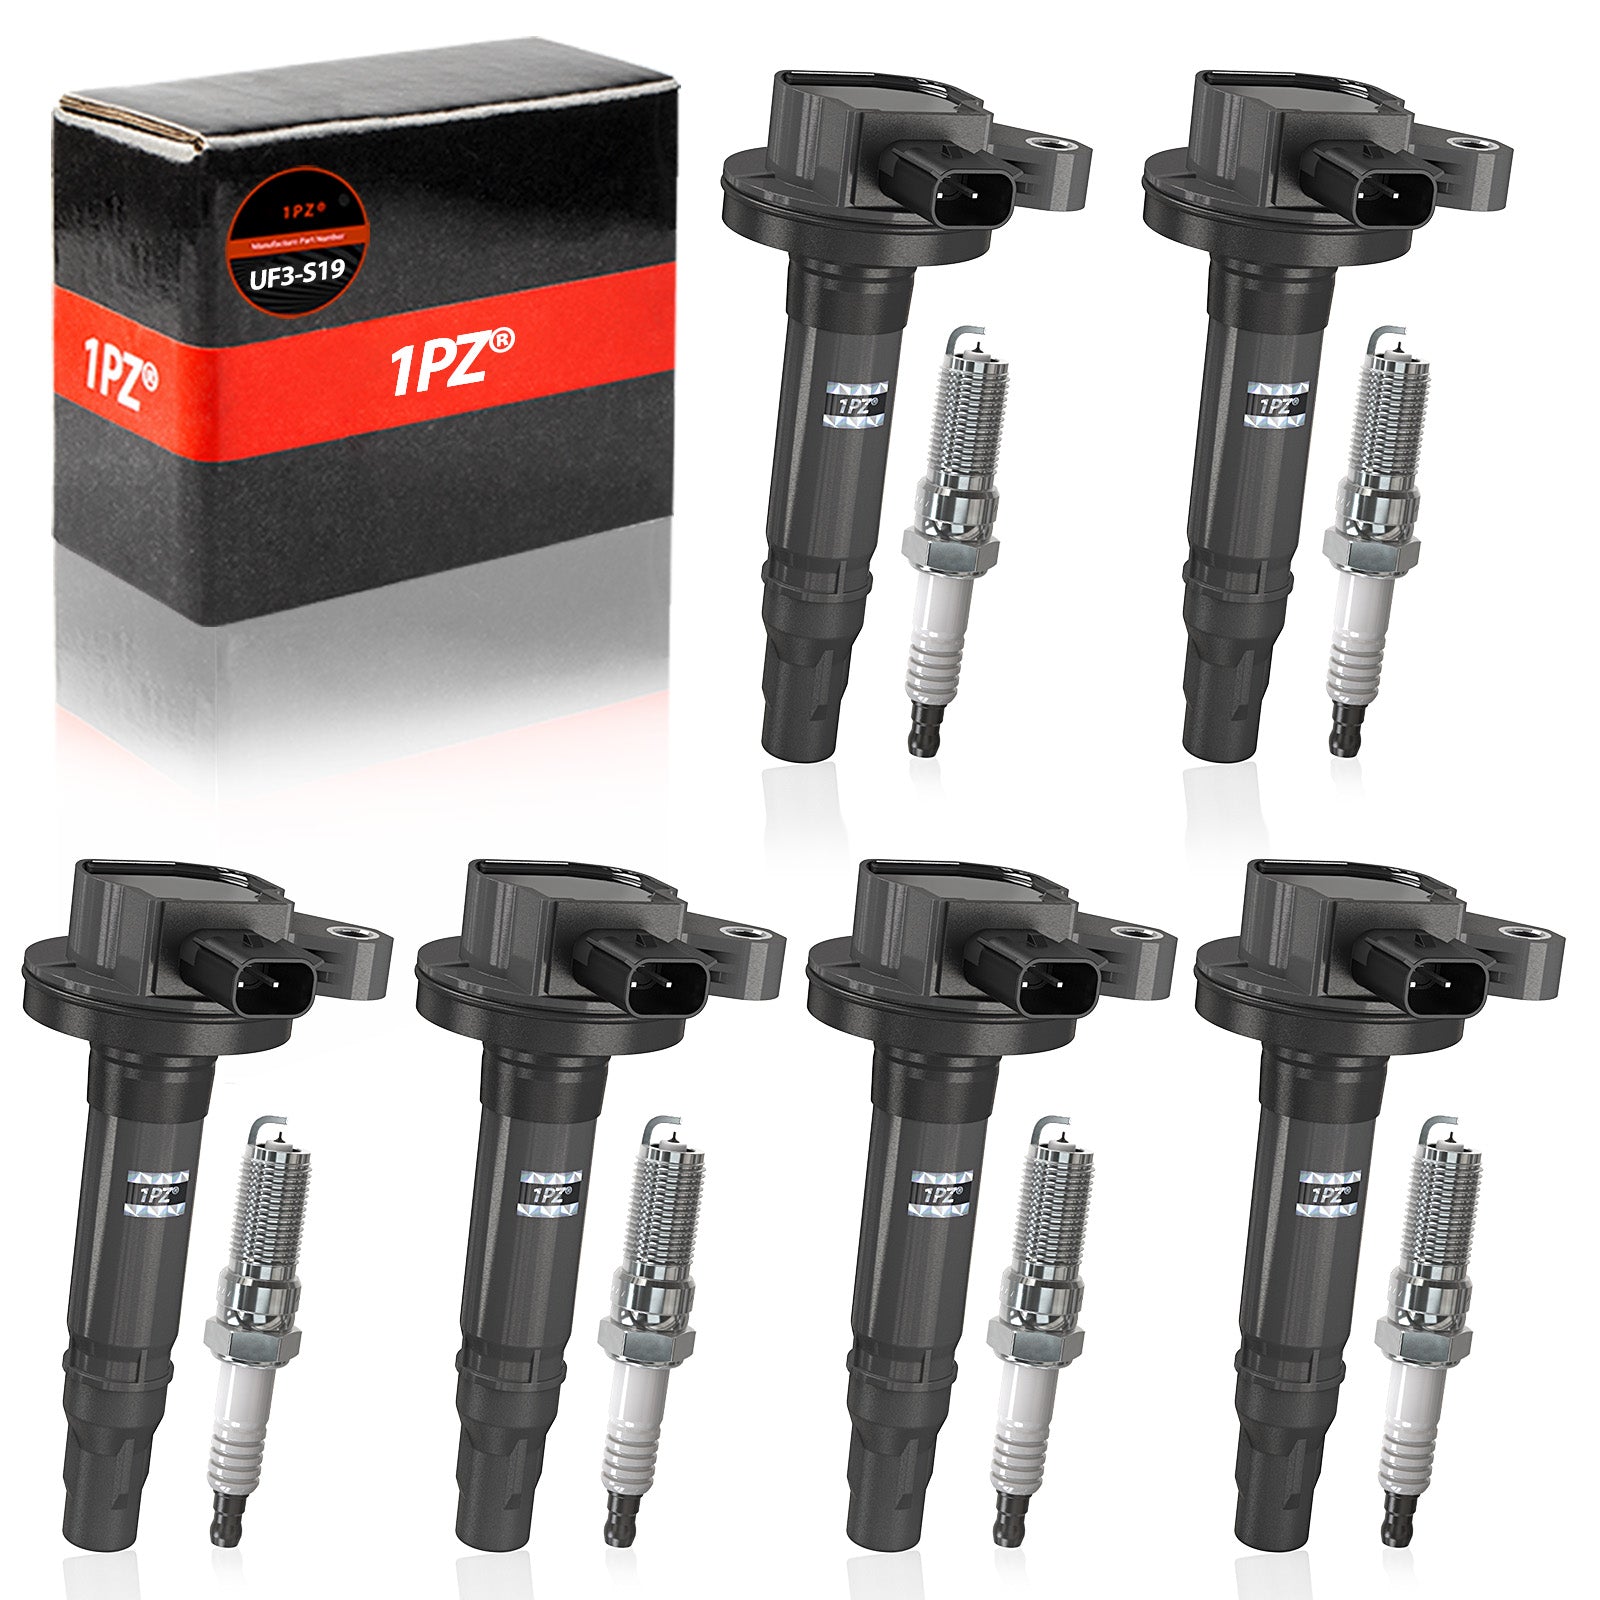 1PZ Set of 6 Ignition Coils Pack UF553 7T4Z-12029-E & Spark Plugs 5019 Replacement for Ford Flex Taurus Edge Lincoln MKS MKT MKZ MKX Mercury Sable 3.5L 3.7L V6 OEM DG520 UF553 GN10237 C1595